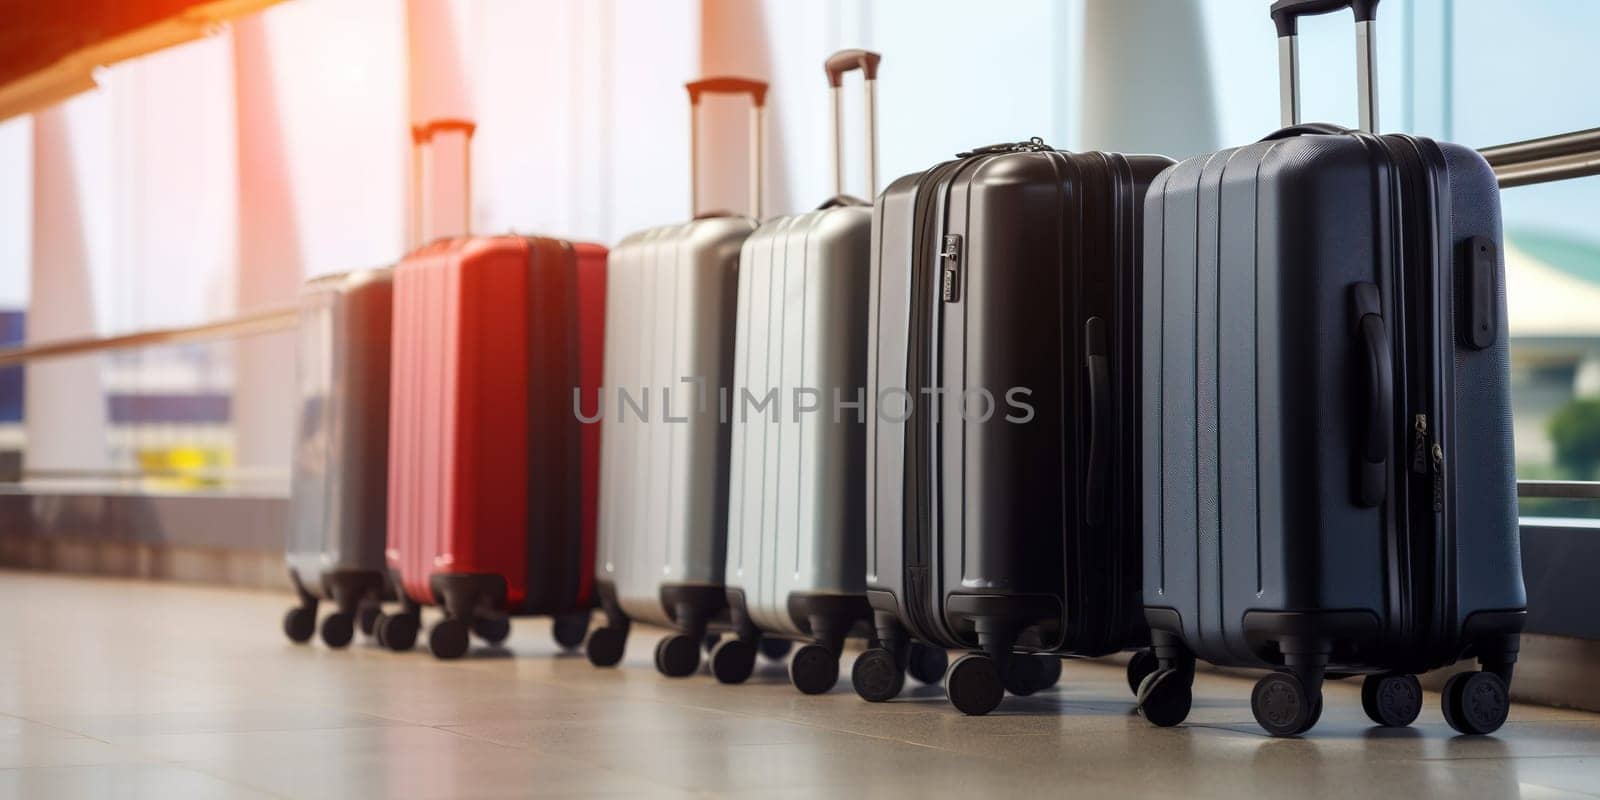 Suitcases Standing In Airport Hall Waiting Fly Passengers by tan4ikk1